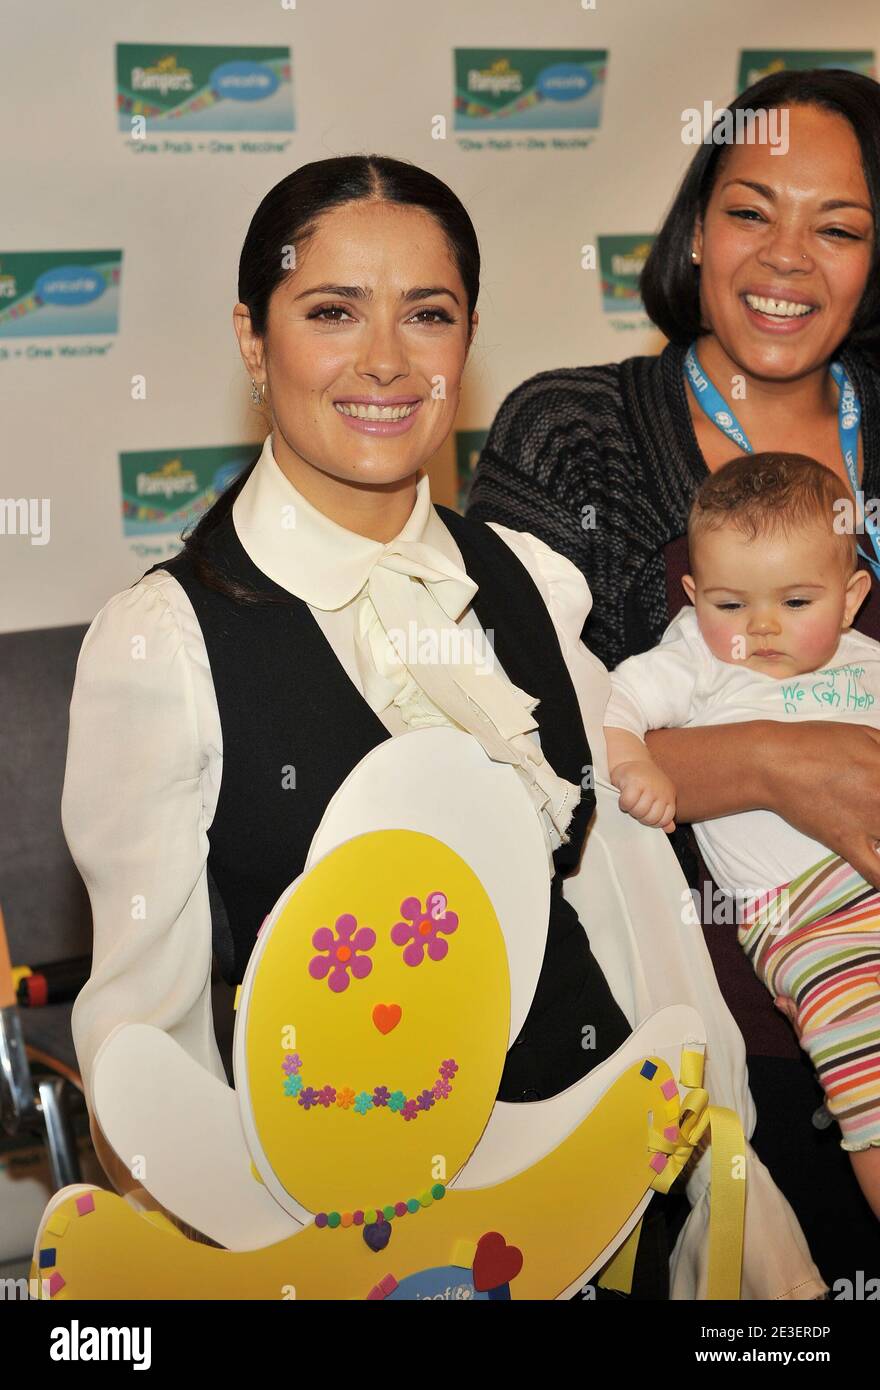 Actress Salma Hayek launches the 2nd year of the 'One Pack = One Vaccine' campaign, a partnership between Pampers & UNICEF that provides life-saving vaccines to help eliminate Maternal and Neonatal Tetanus, at US Fund for UNICEF in New York City, NY, USA on February 5, 2009. Through May 1, 2009, for every specially marked pack of Pampers product purchased in the USA and Canada, Pampers will provide UNICEF with funding for one life-saving tetanus vaccine. Photo by Slaven Vlasic/ABACA Stock Photo